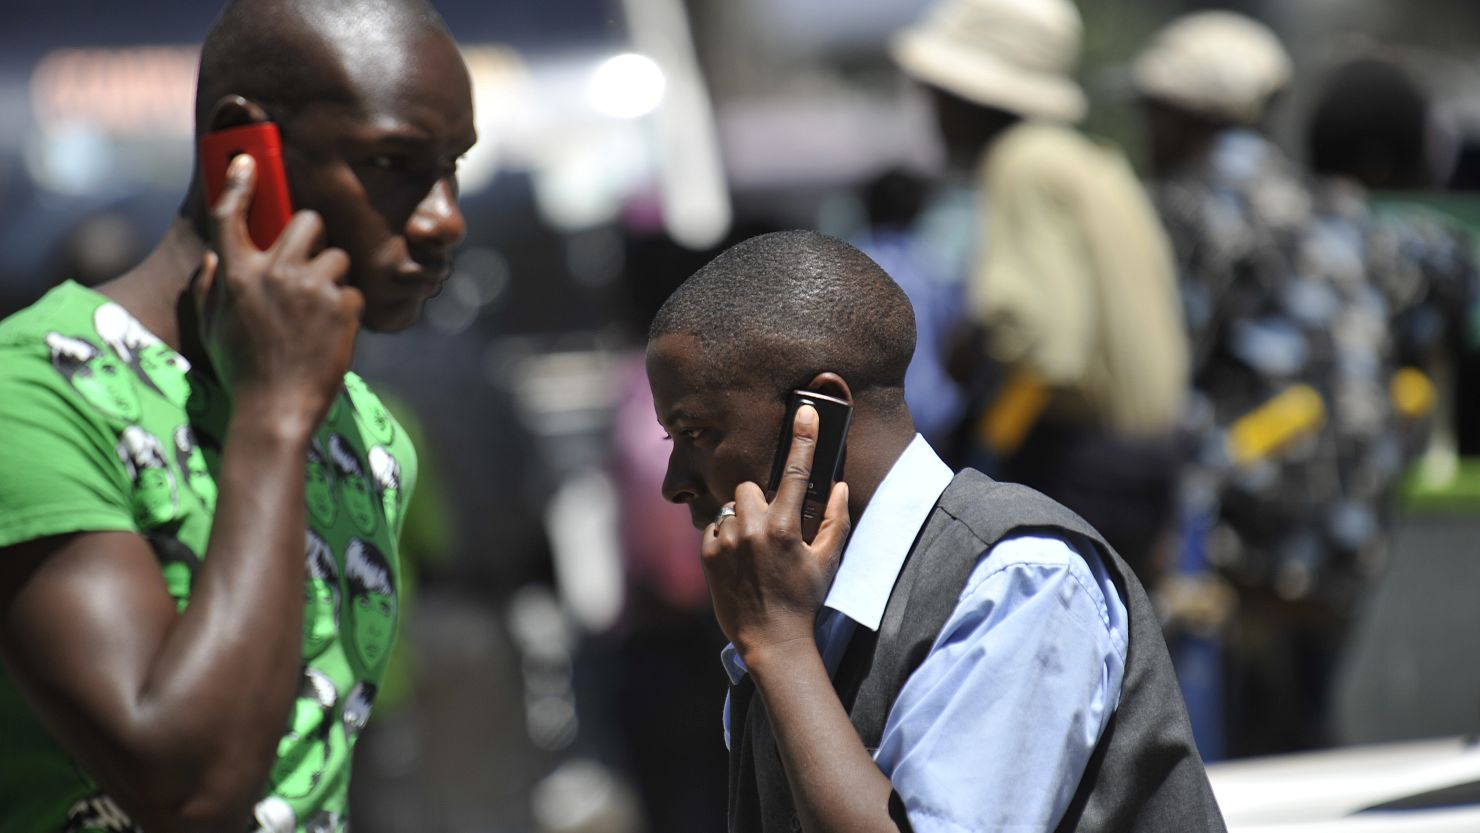 People walk while speaking on the phone on October 1,2012 in Nairobi.